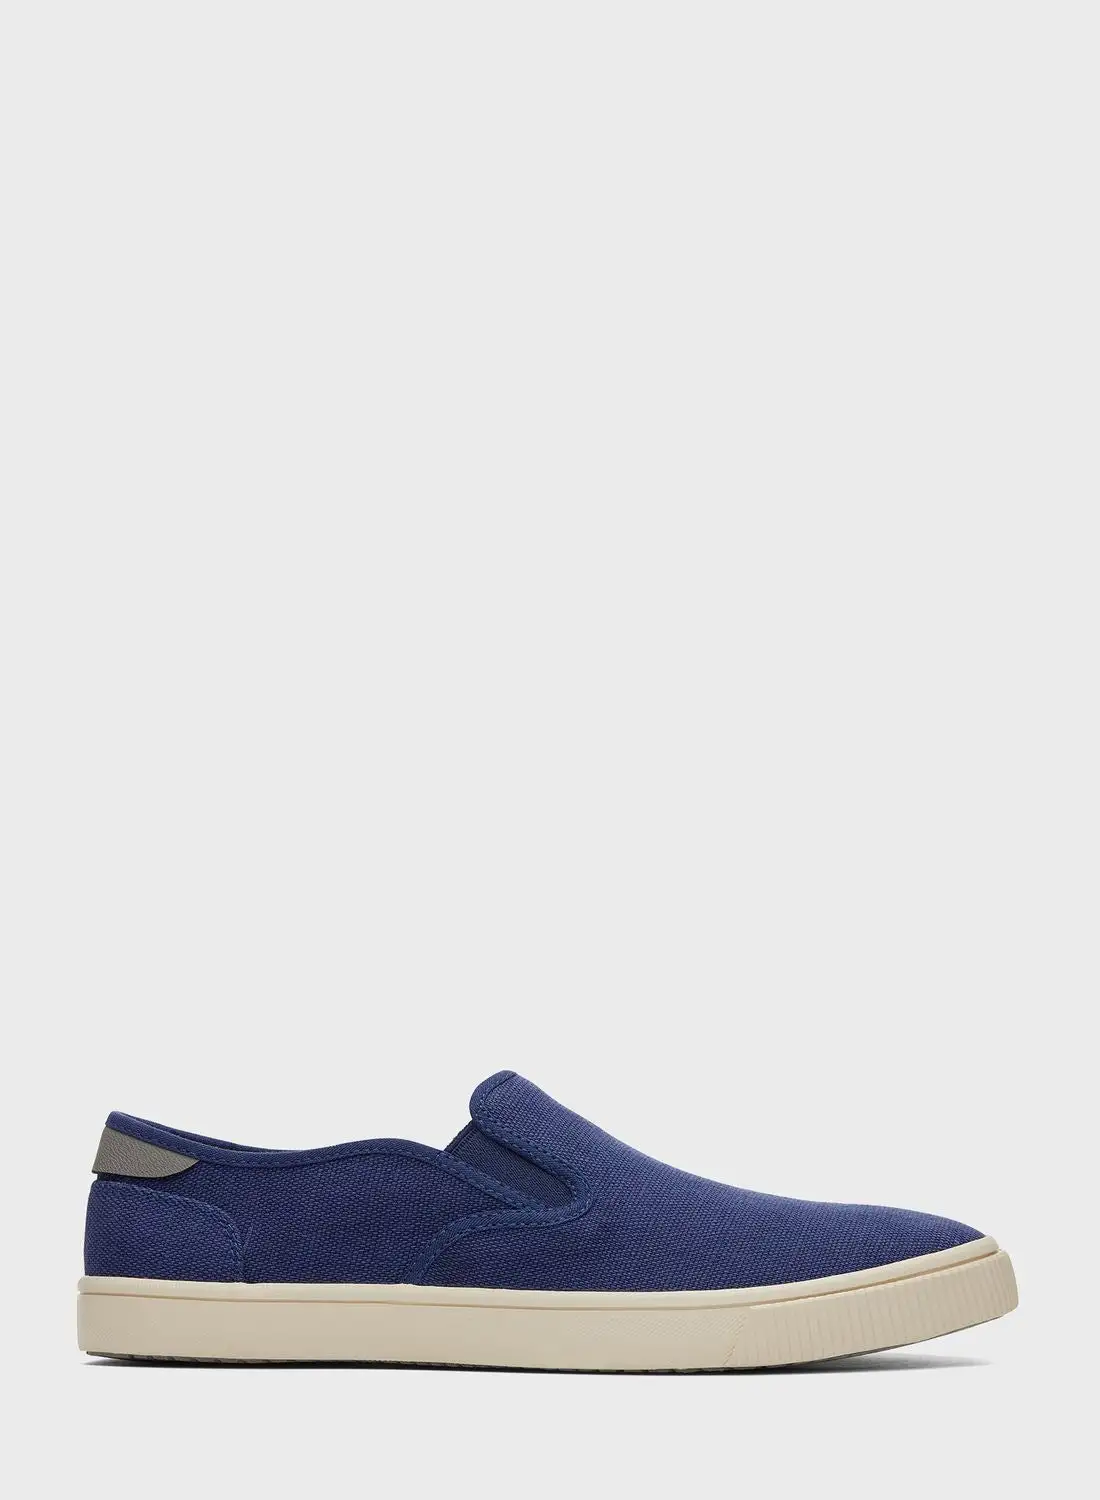 TOMS Casual Slip Ons Loafers